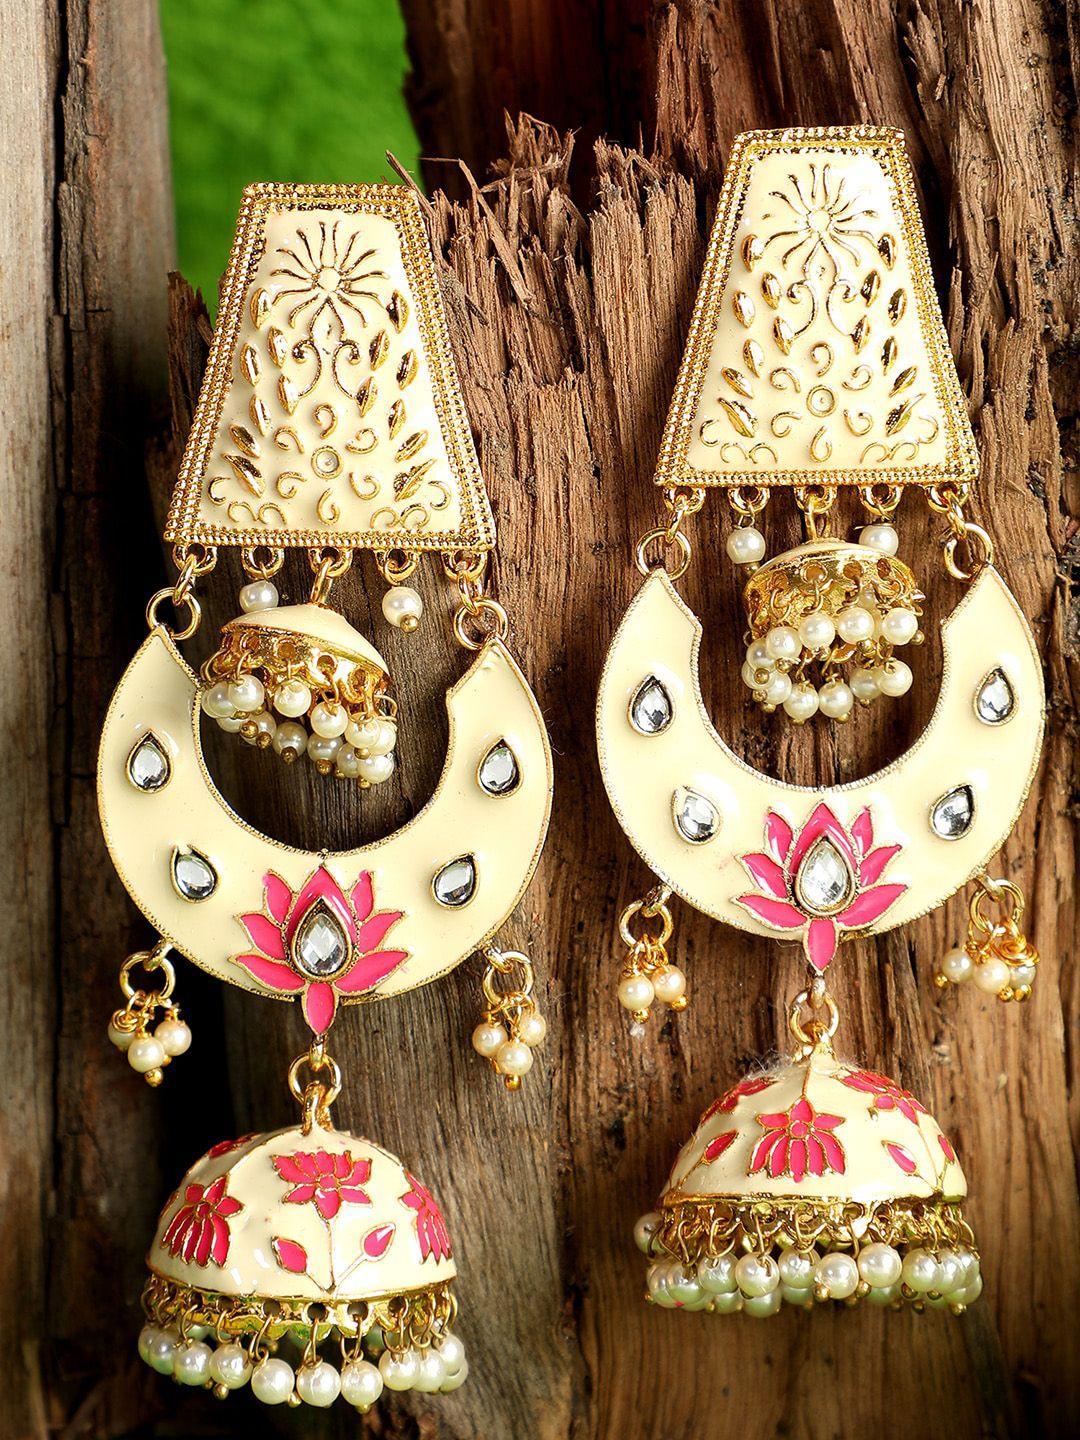 anikas creation off-white & pink gold-plated dome shaped jhumkas